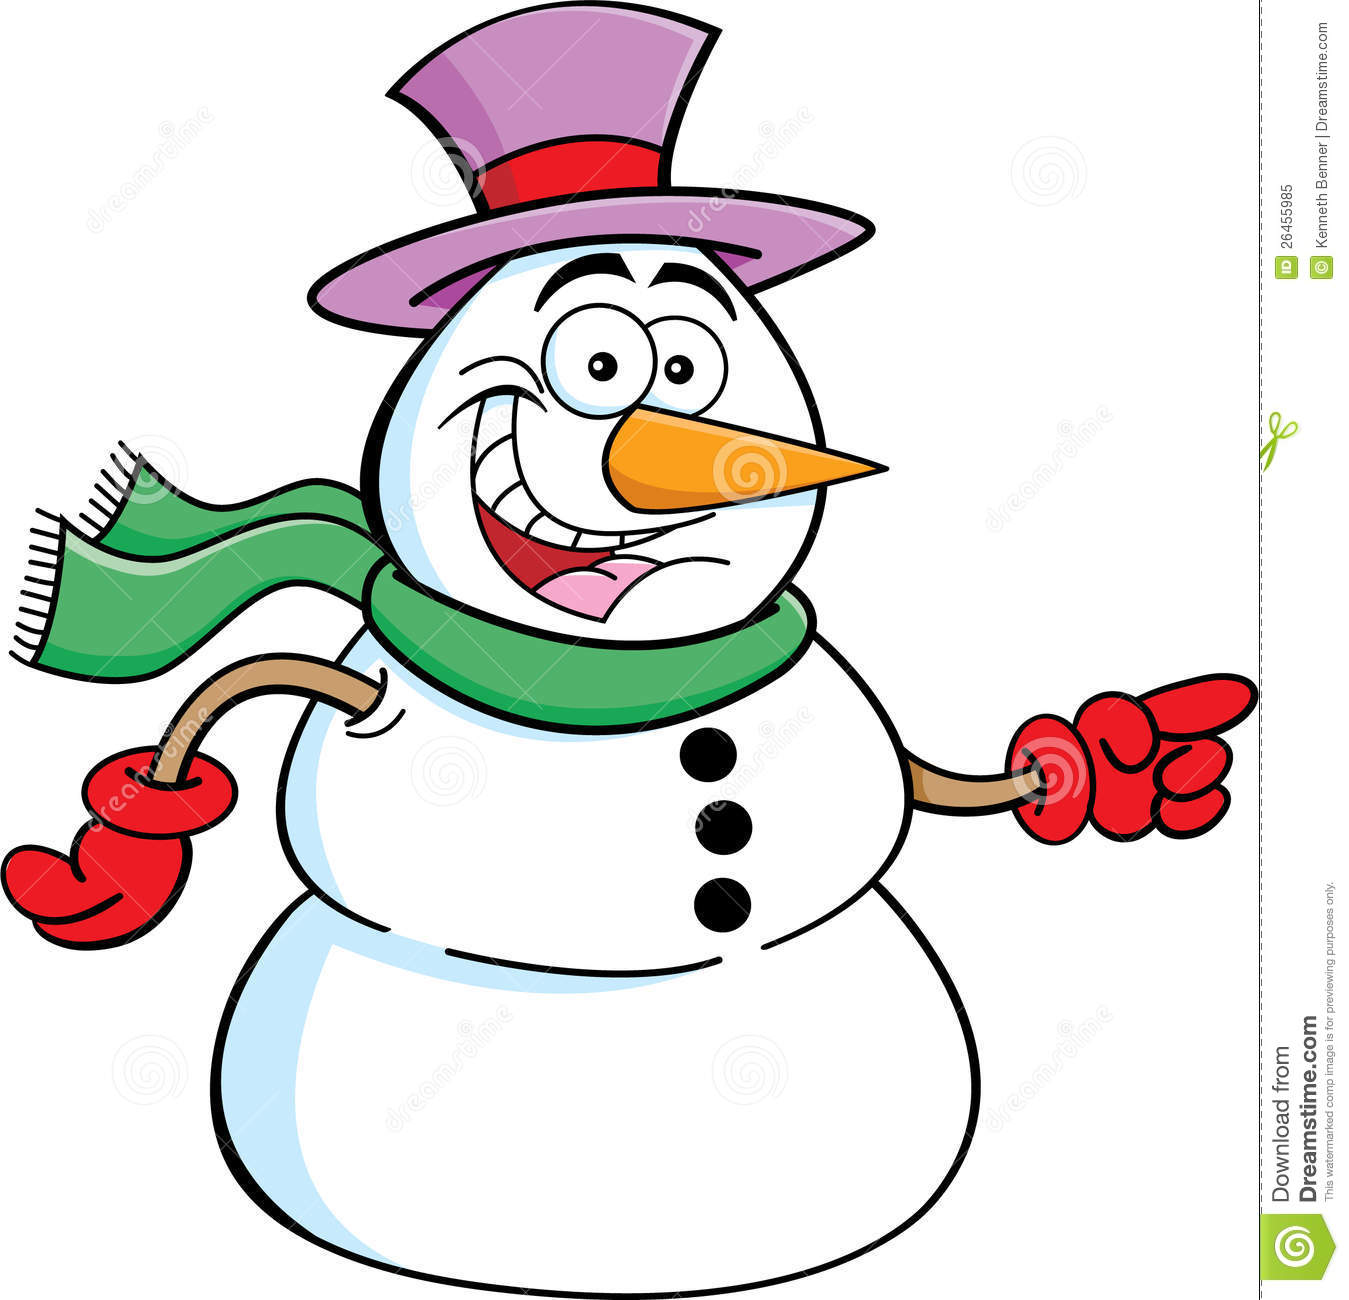 Pointing Snowman Royalty Free Stock Photo   Image  26455985